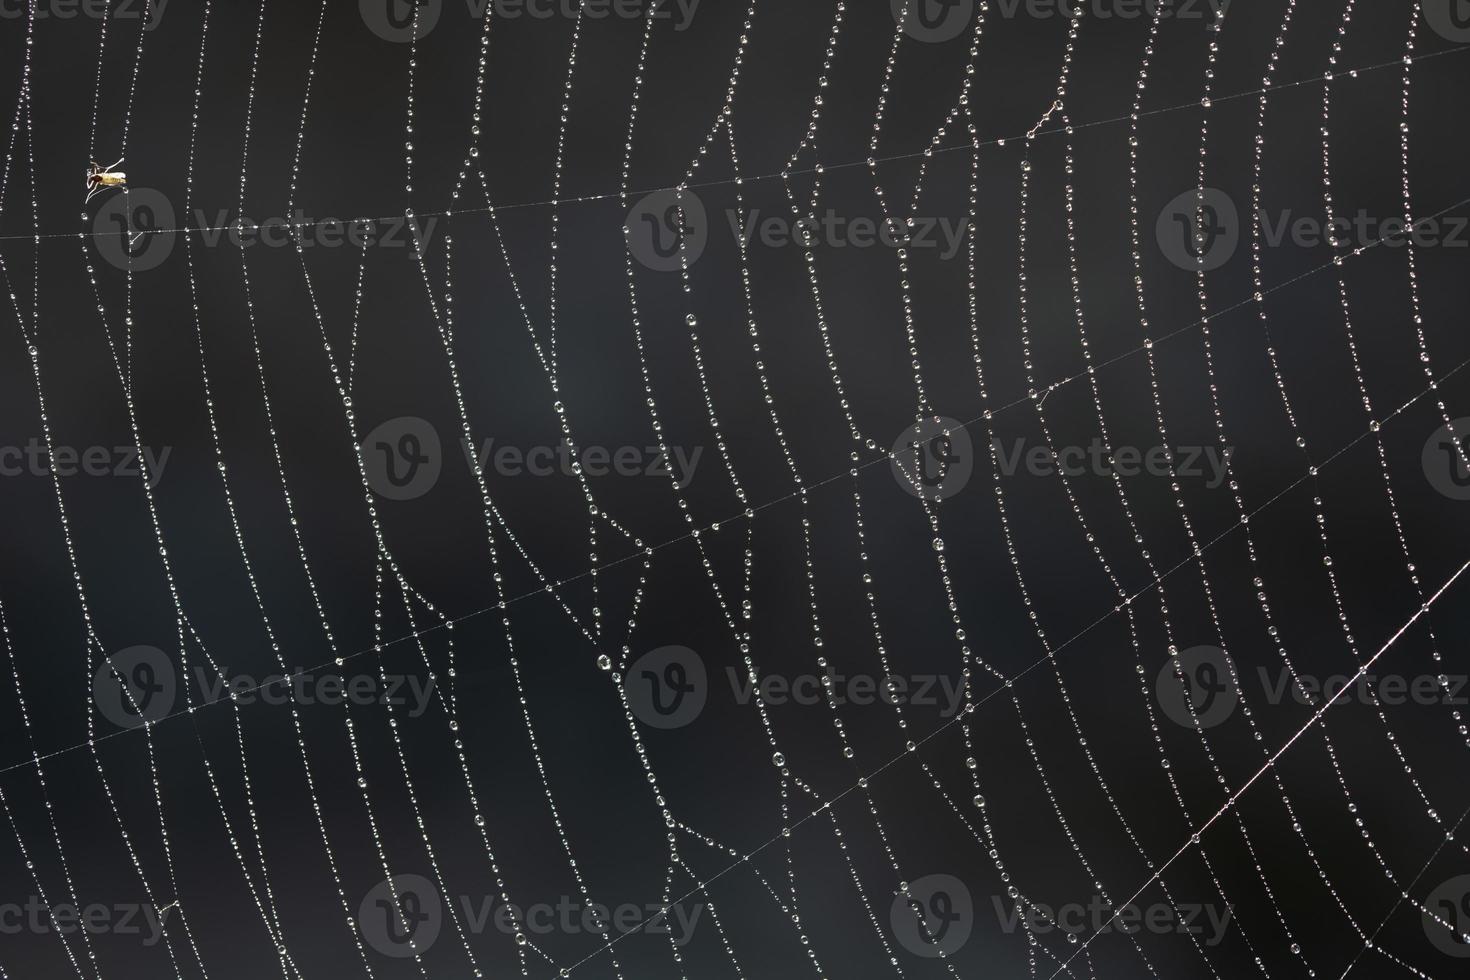 Texture and background of a spider web with small drops of water hanging from it against a dark background. A small insect got caught in it on the edge. photo